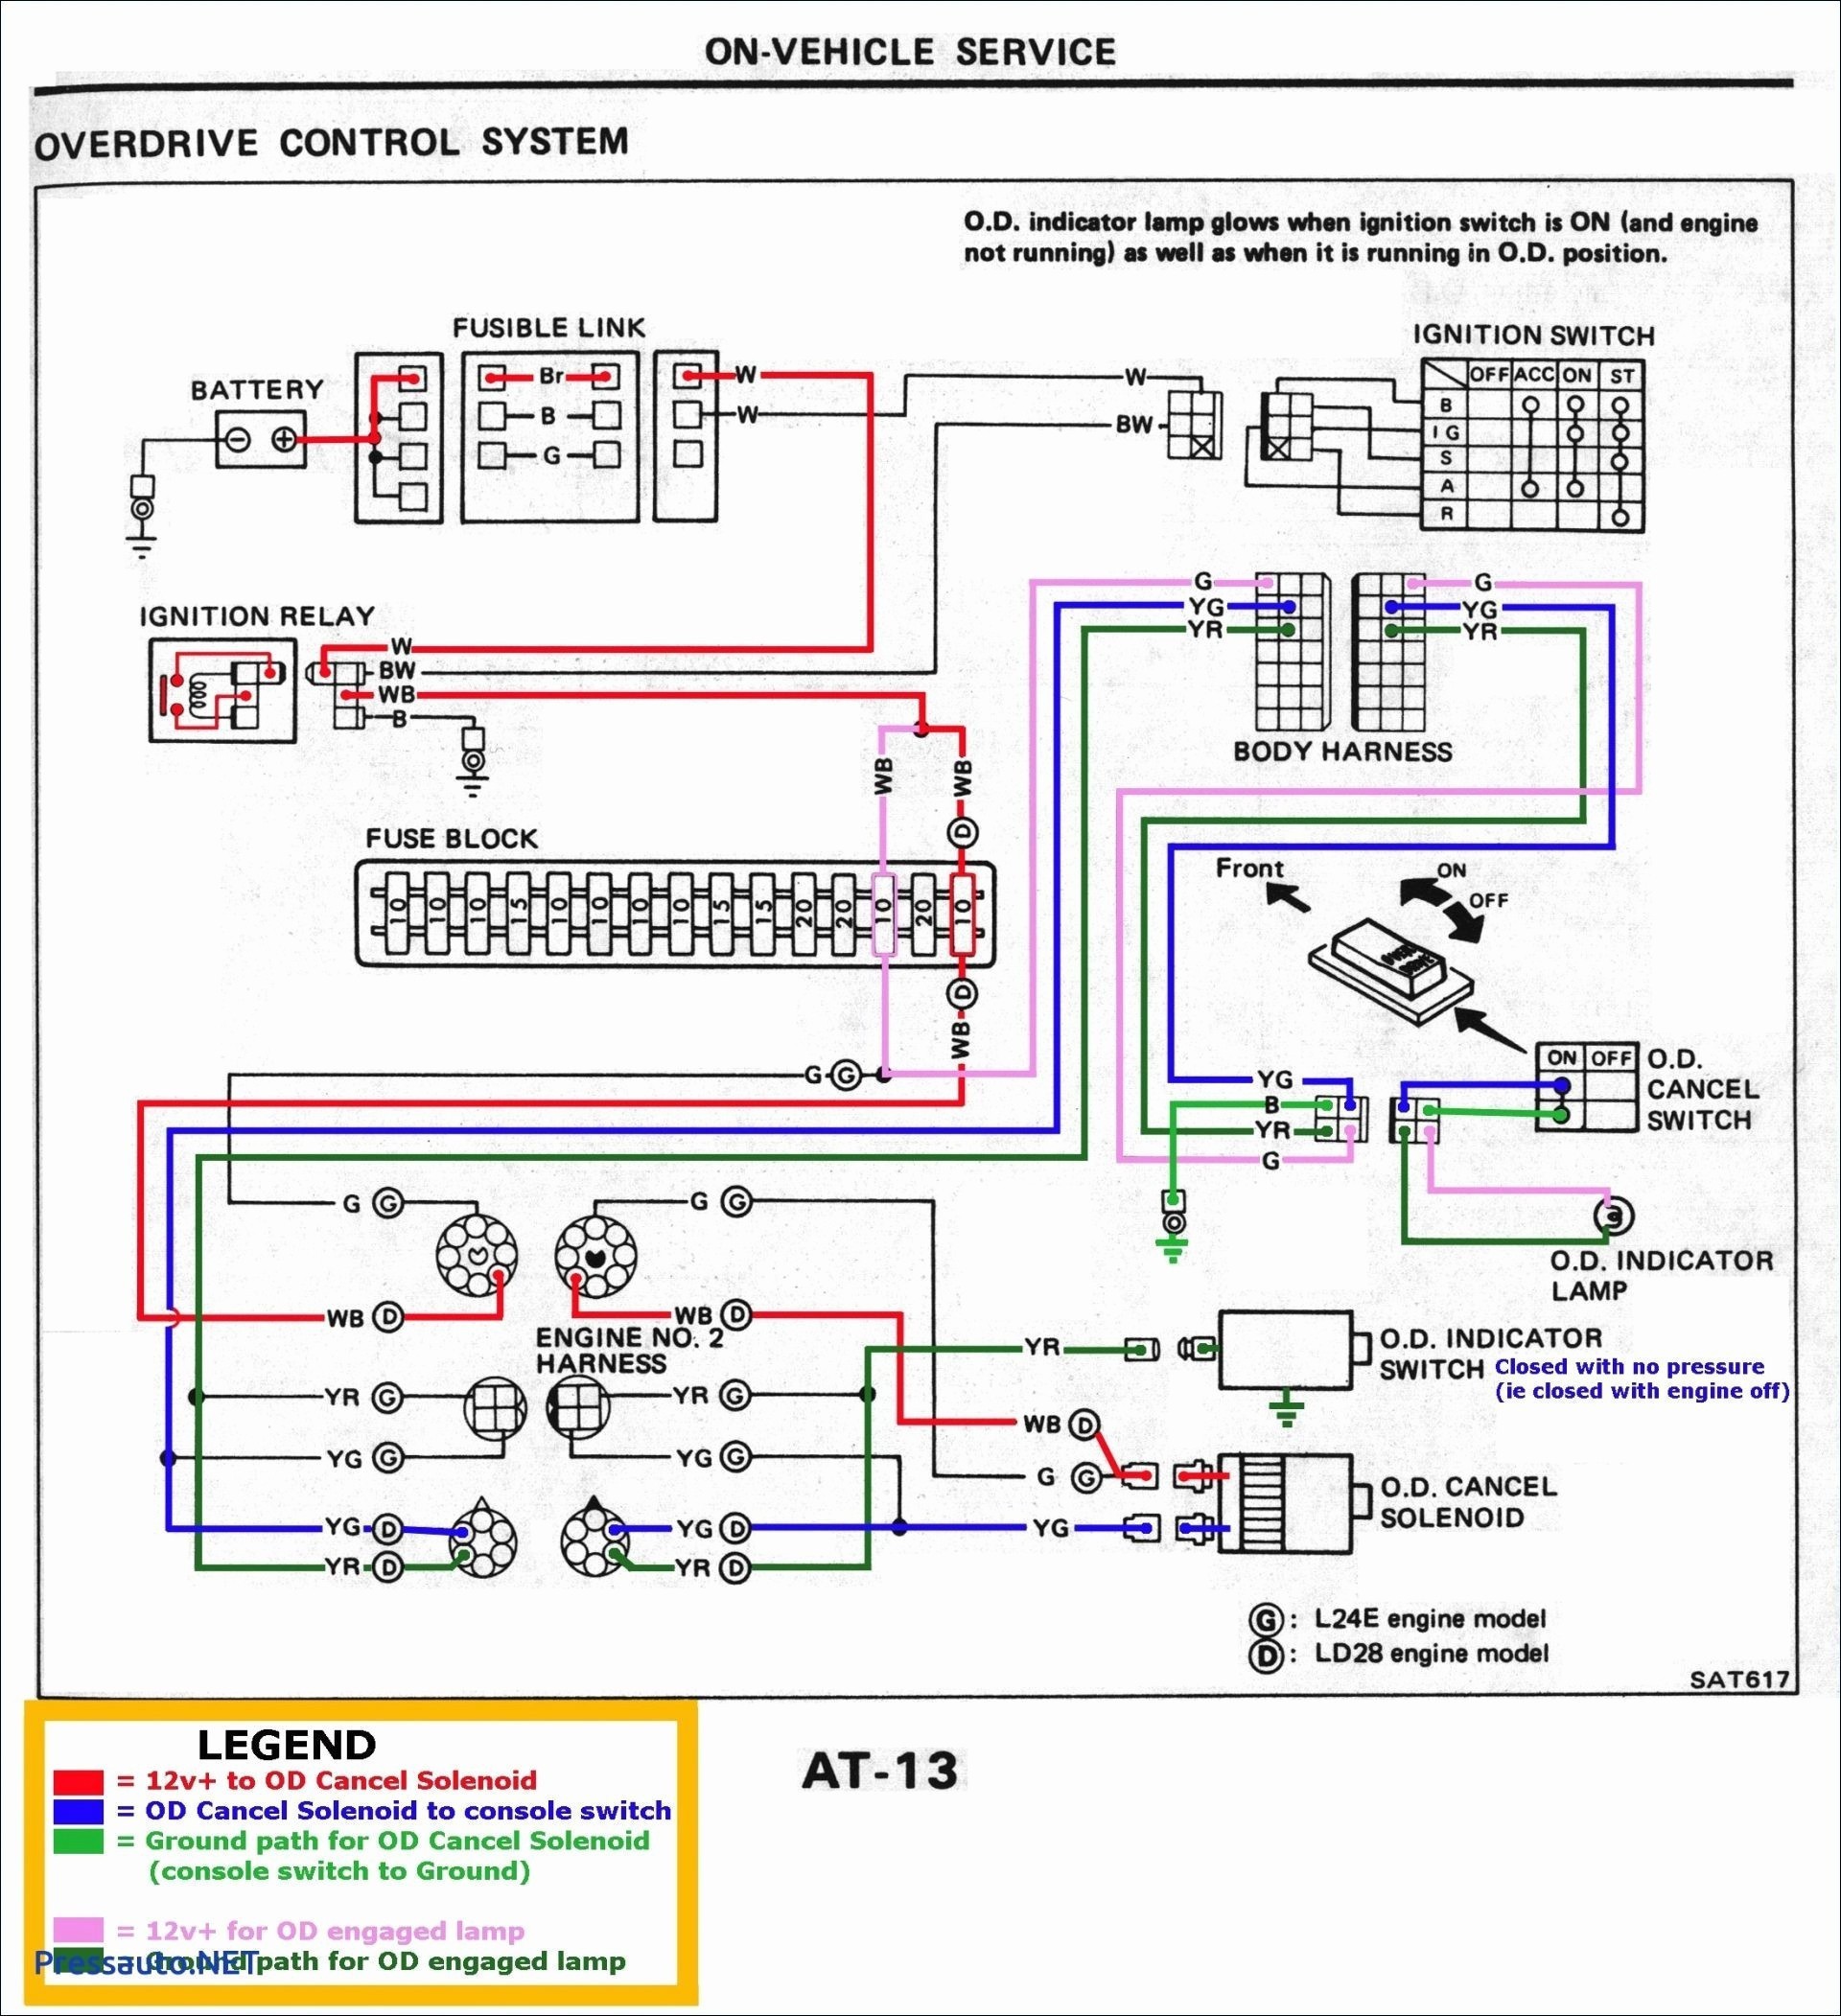 Light Switch Wiring Diagram Switches Lights Book Wiring Diagram Switch To Light New Wiring Diagram Light Switch Wiring Diagram 2